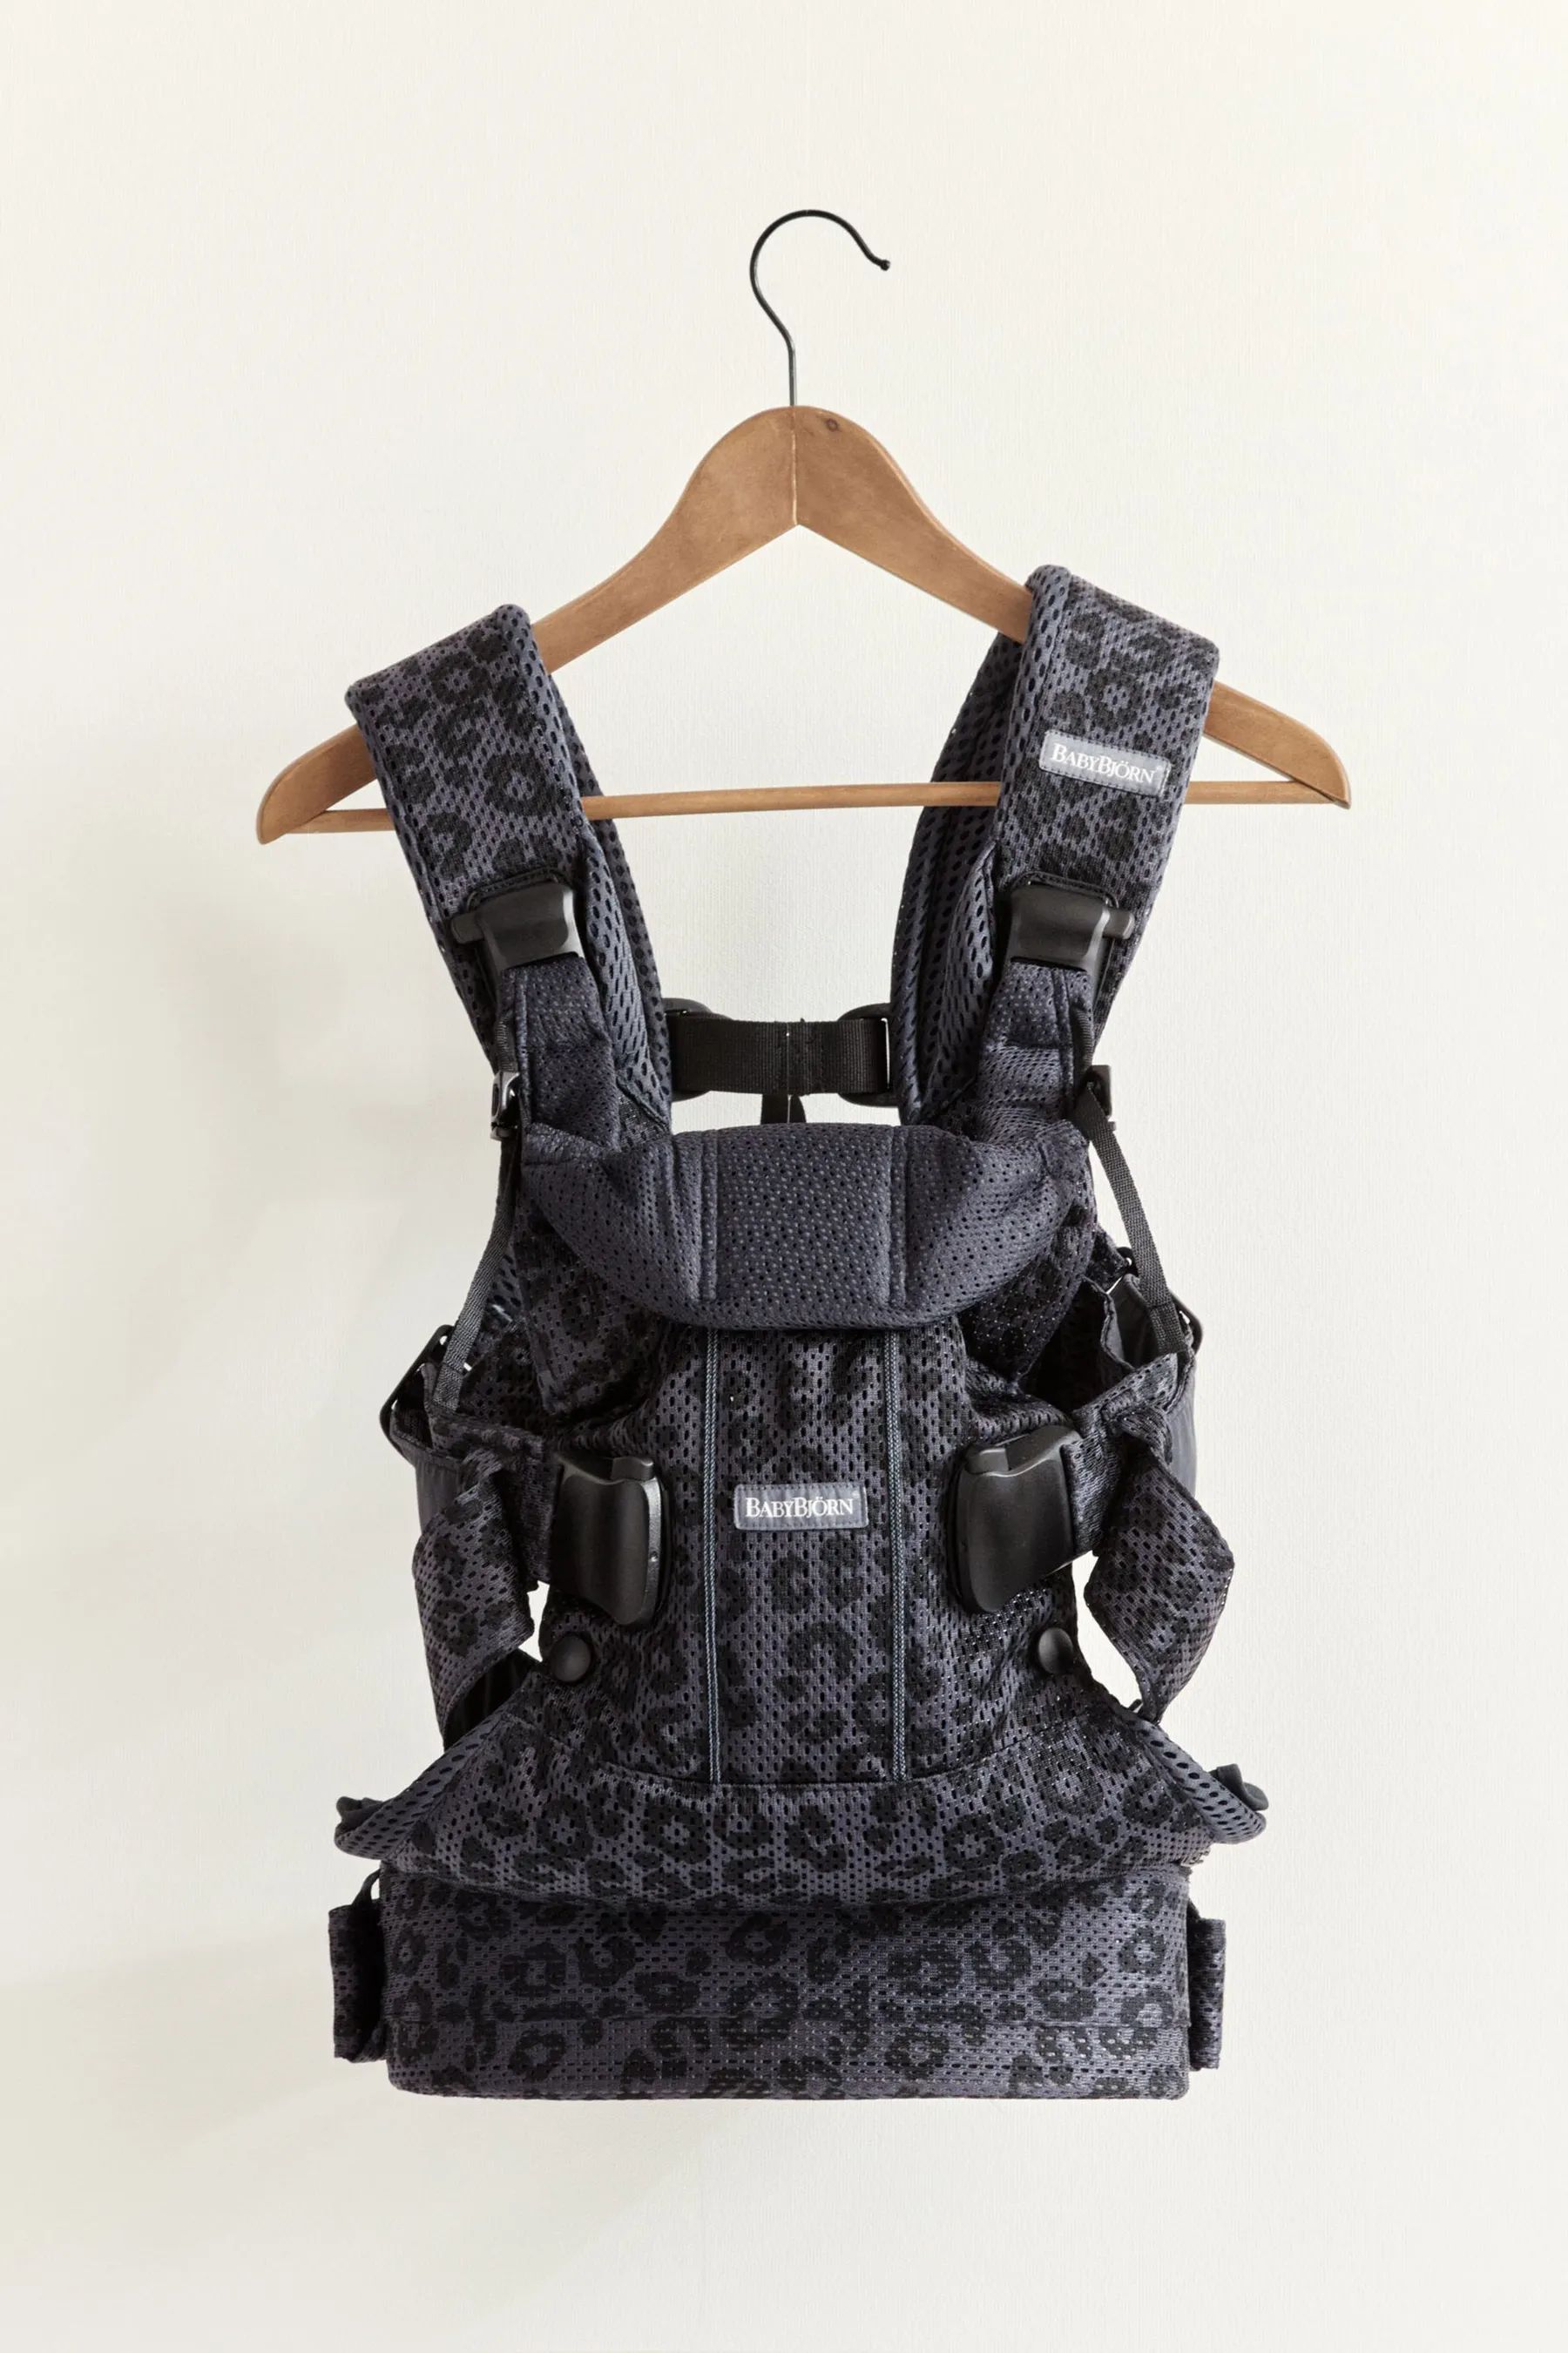 Baby Carrier One Air | BabyBjorn